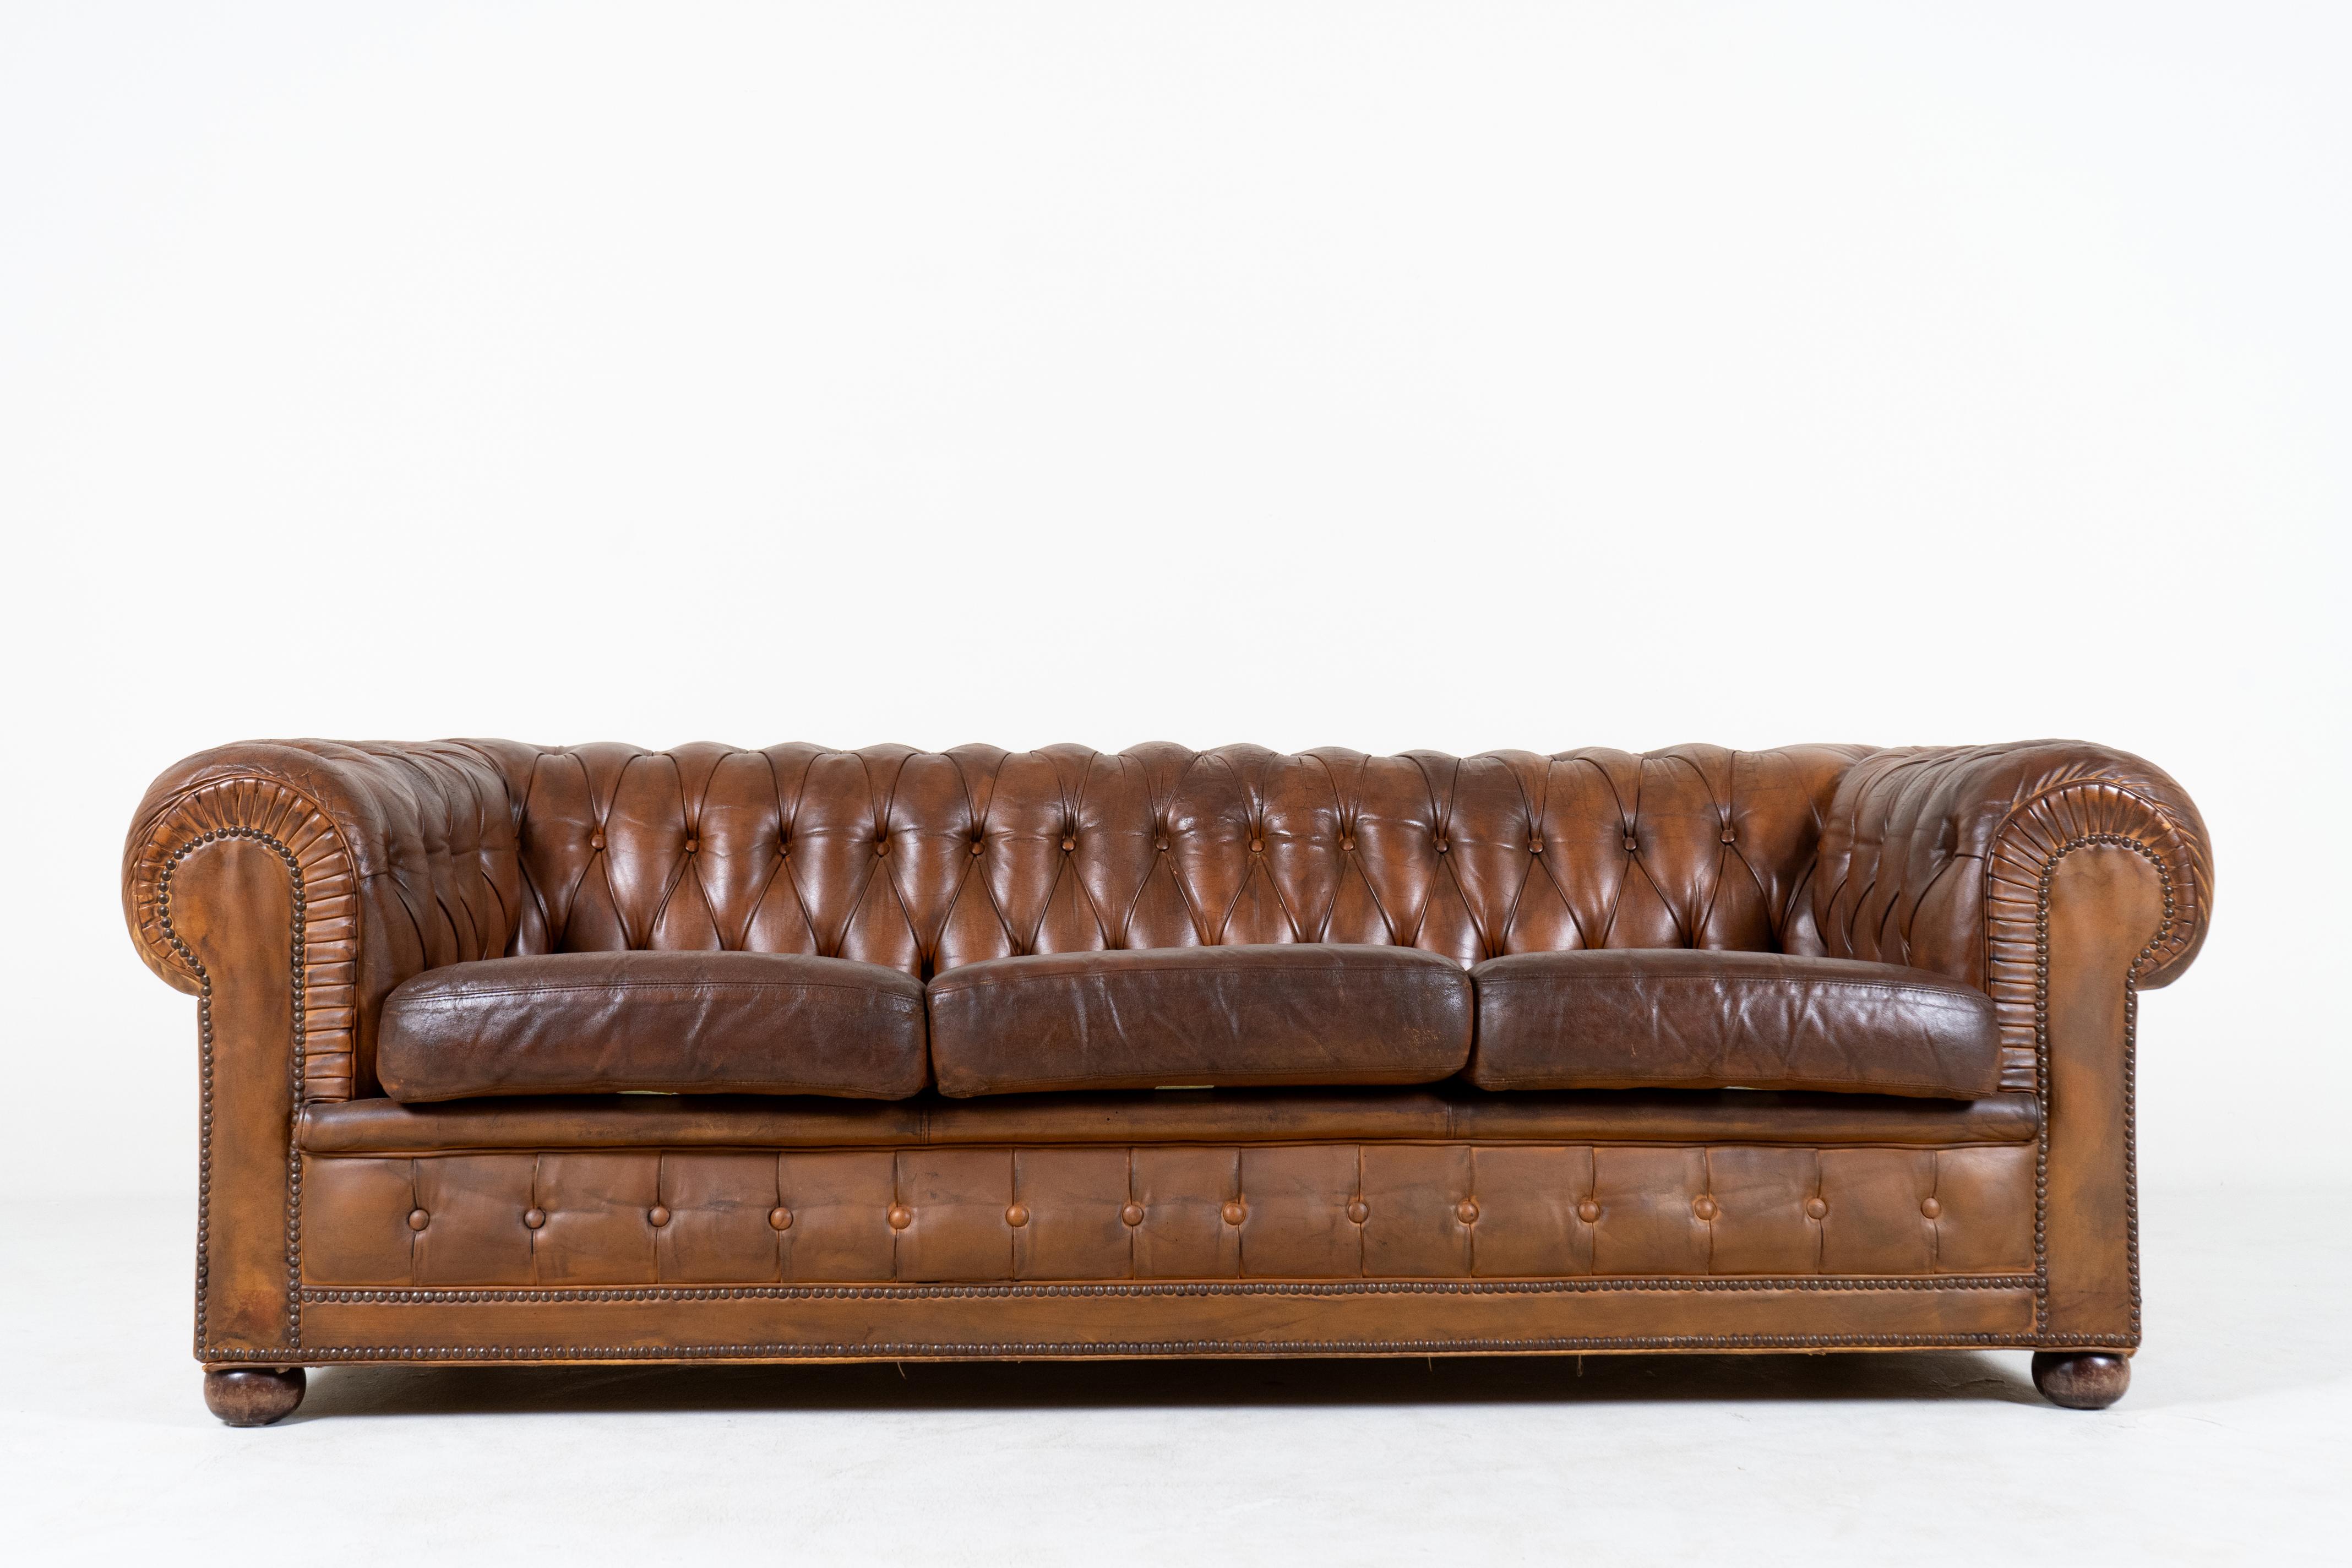 We are delighted to offer this stunning original circa 1960's, very comfortable, fully coil sprung, hand-dyed saddle brown leather club sofa with Chesterfield tufting and exposed nail heads. A very well made, decorative and extremely comfortable